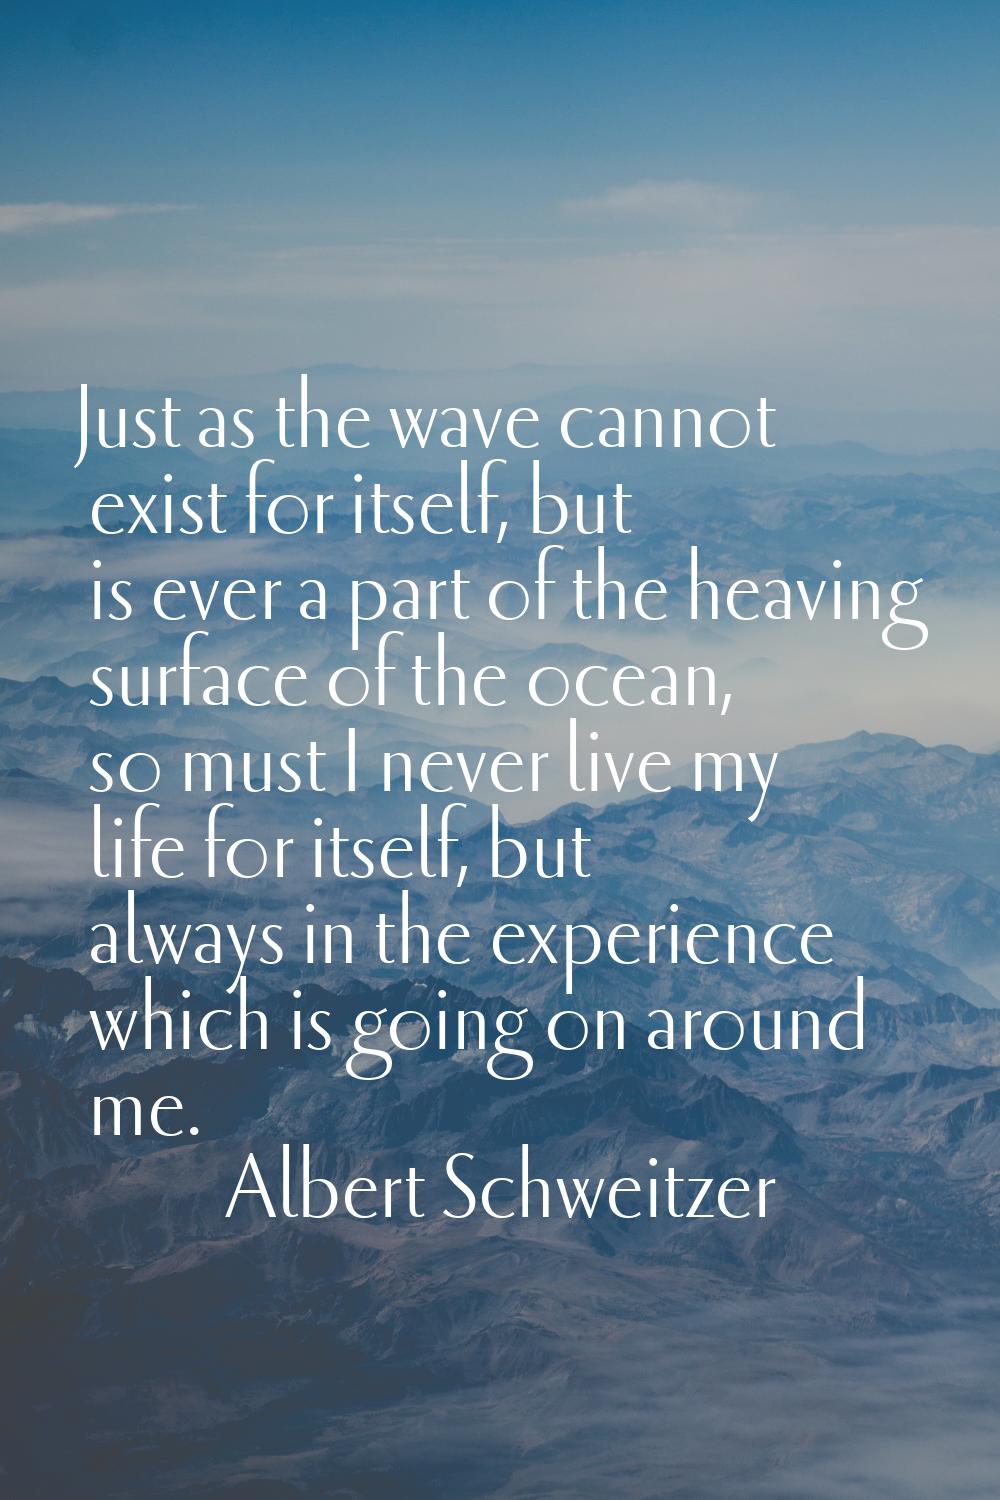 Just as the wave cannot exist for itself, but is ever a part of the heaving surface of the ocean, s